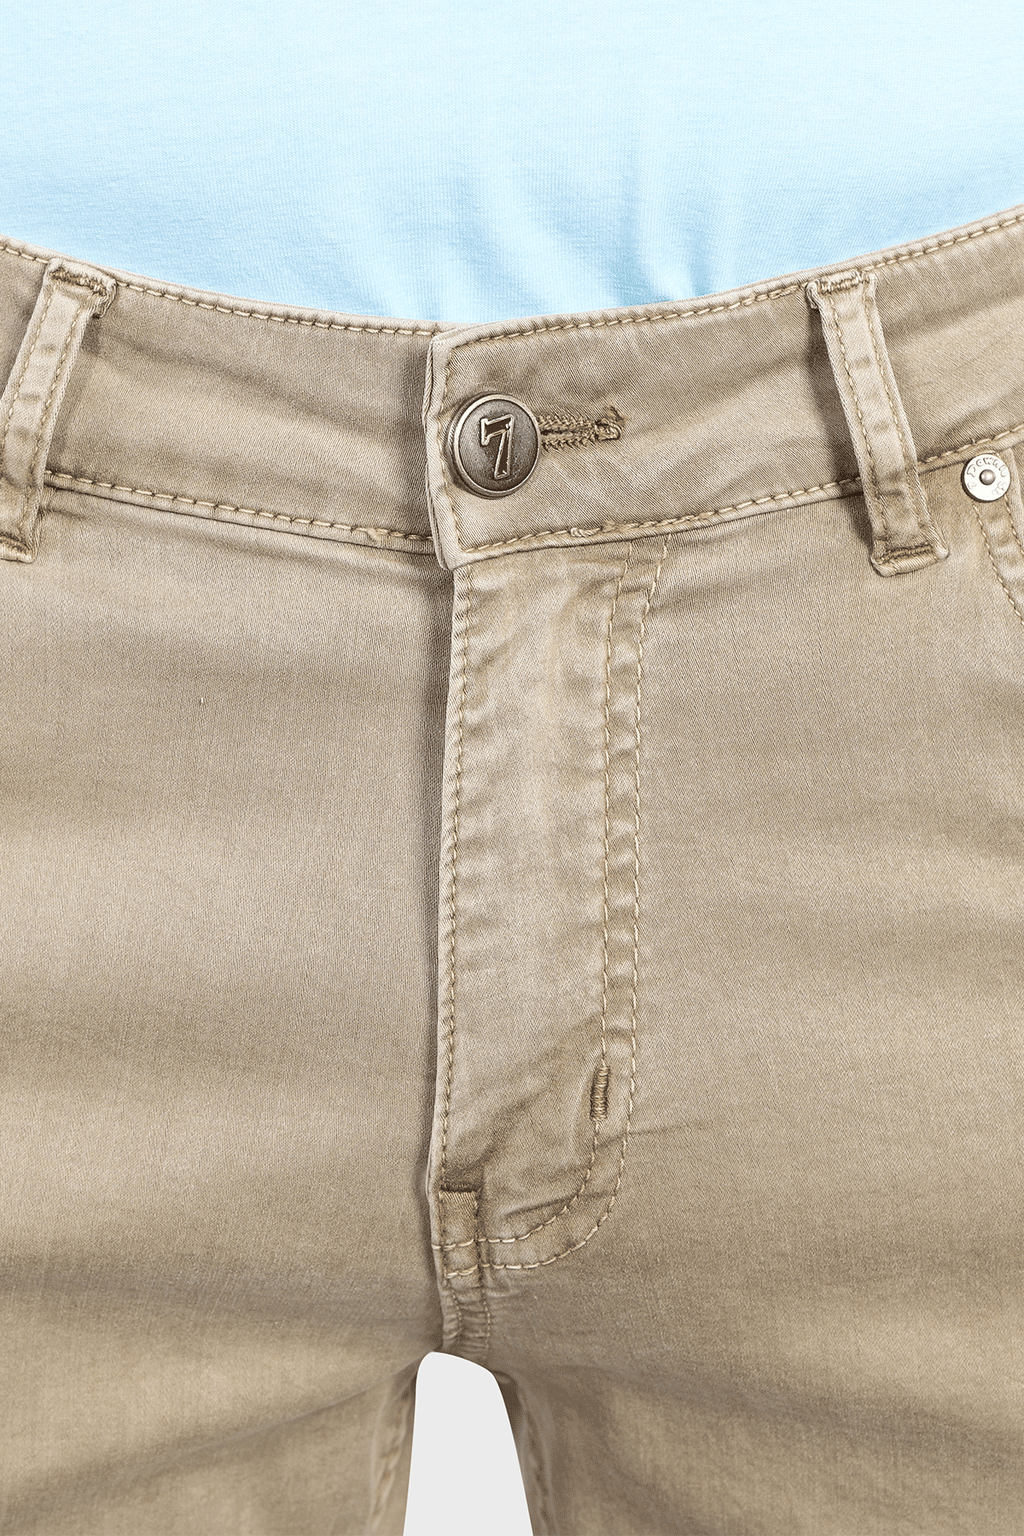 Five Pocket Stretch Pants in Oatmeal - 7 Downie St.®